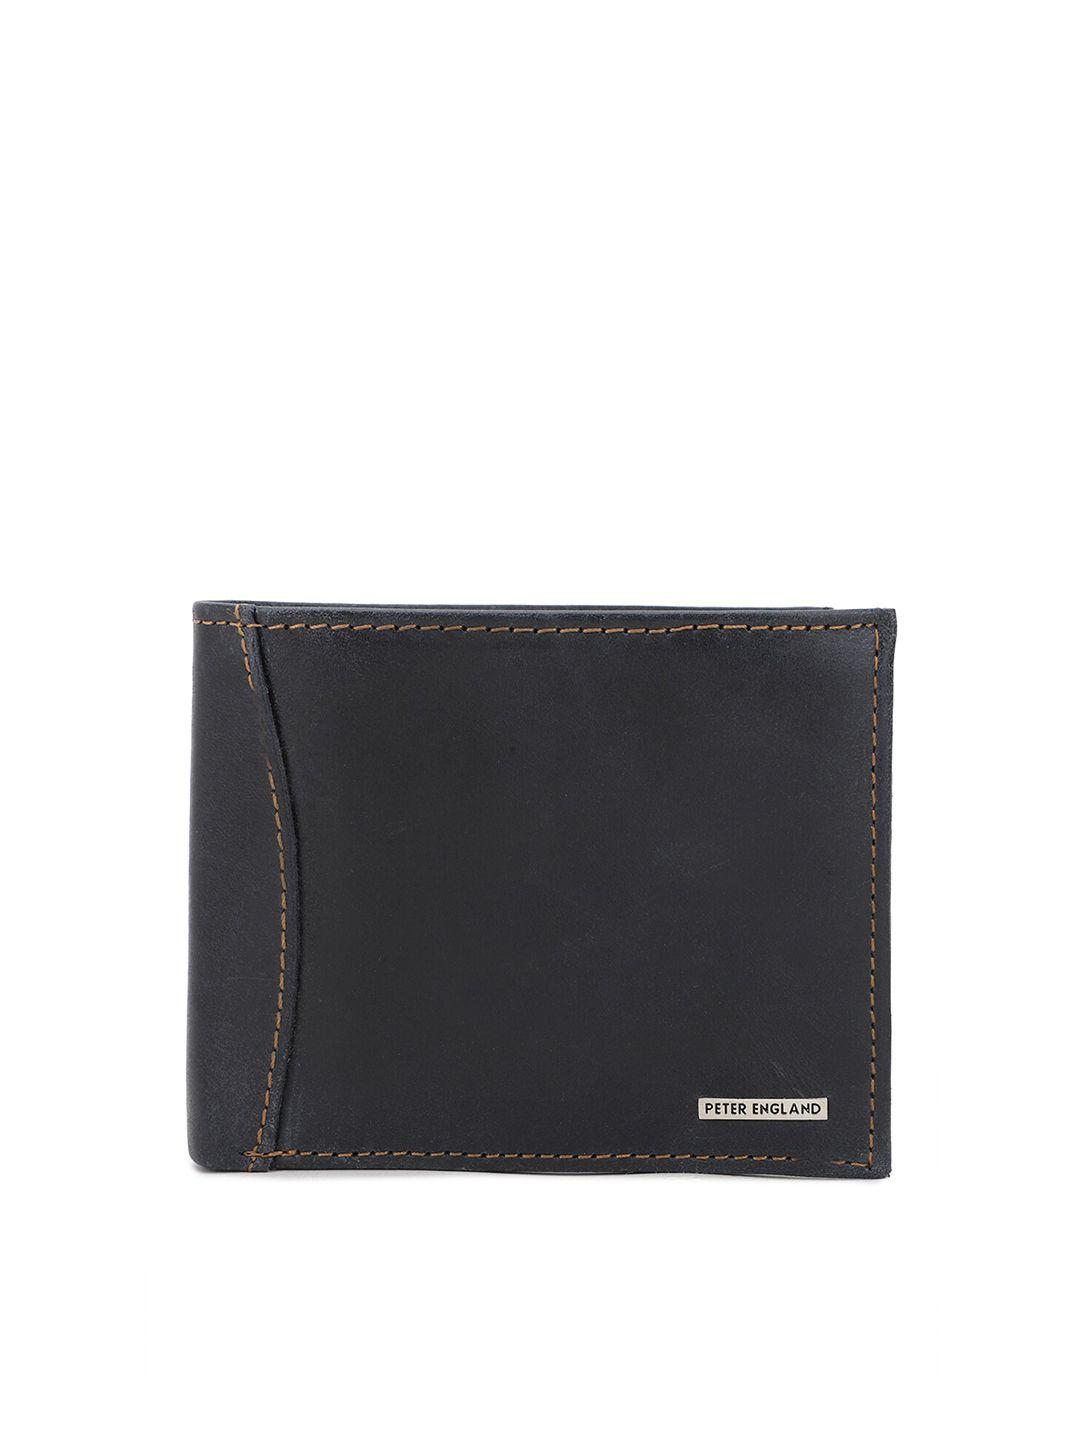 peter england men black leather two fold wallet